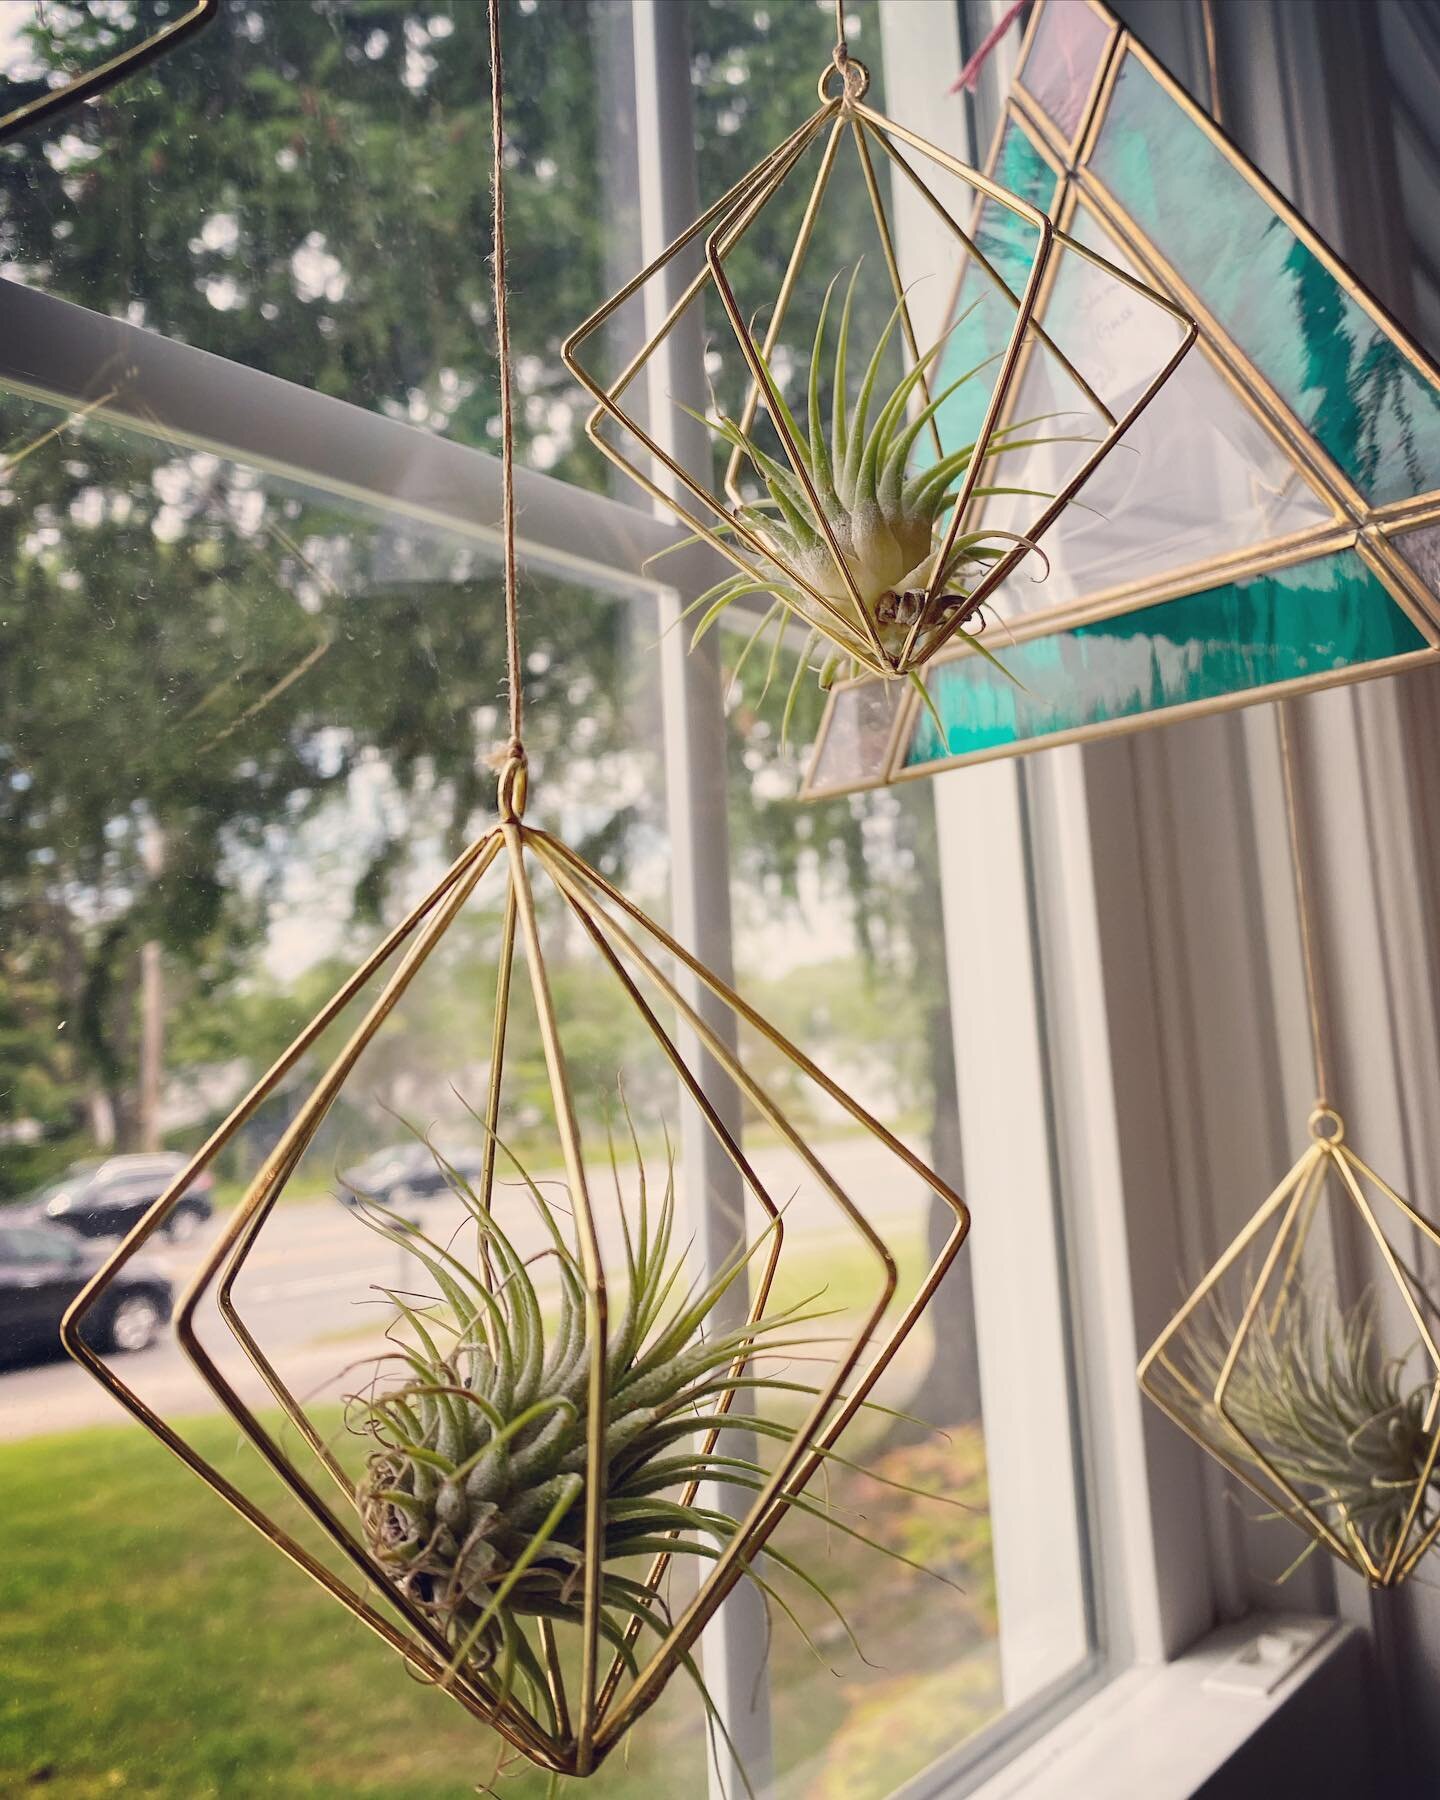 Hanging airplants (6 available)
🌱 $20 each

 
💡 Purchase all 6 for $100 and hang them staggered in a low light window!! 

Vintage stained glass $20 

✨ Pickup only @theshopon7 
✨ venmo payment to hold